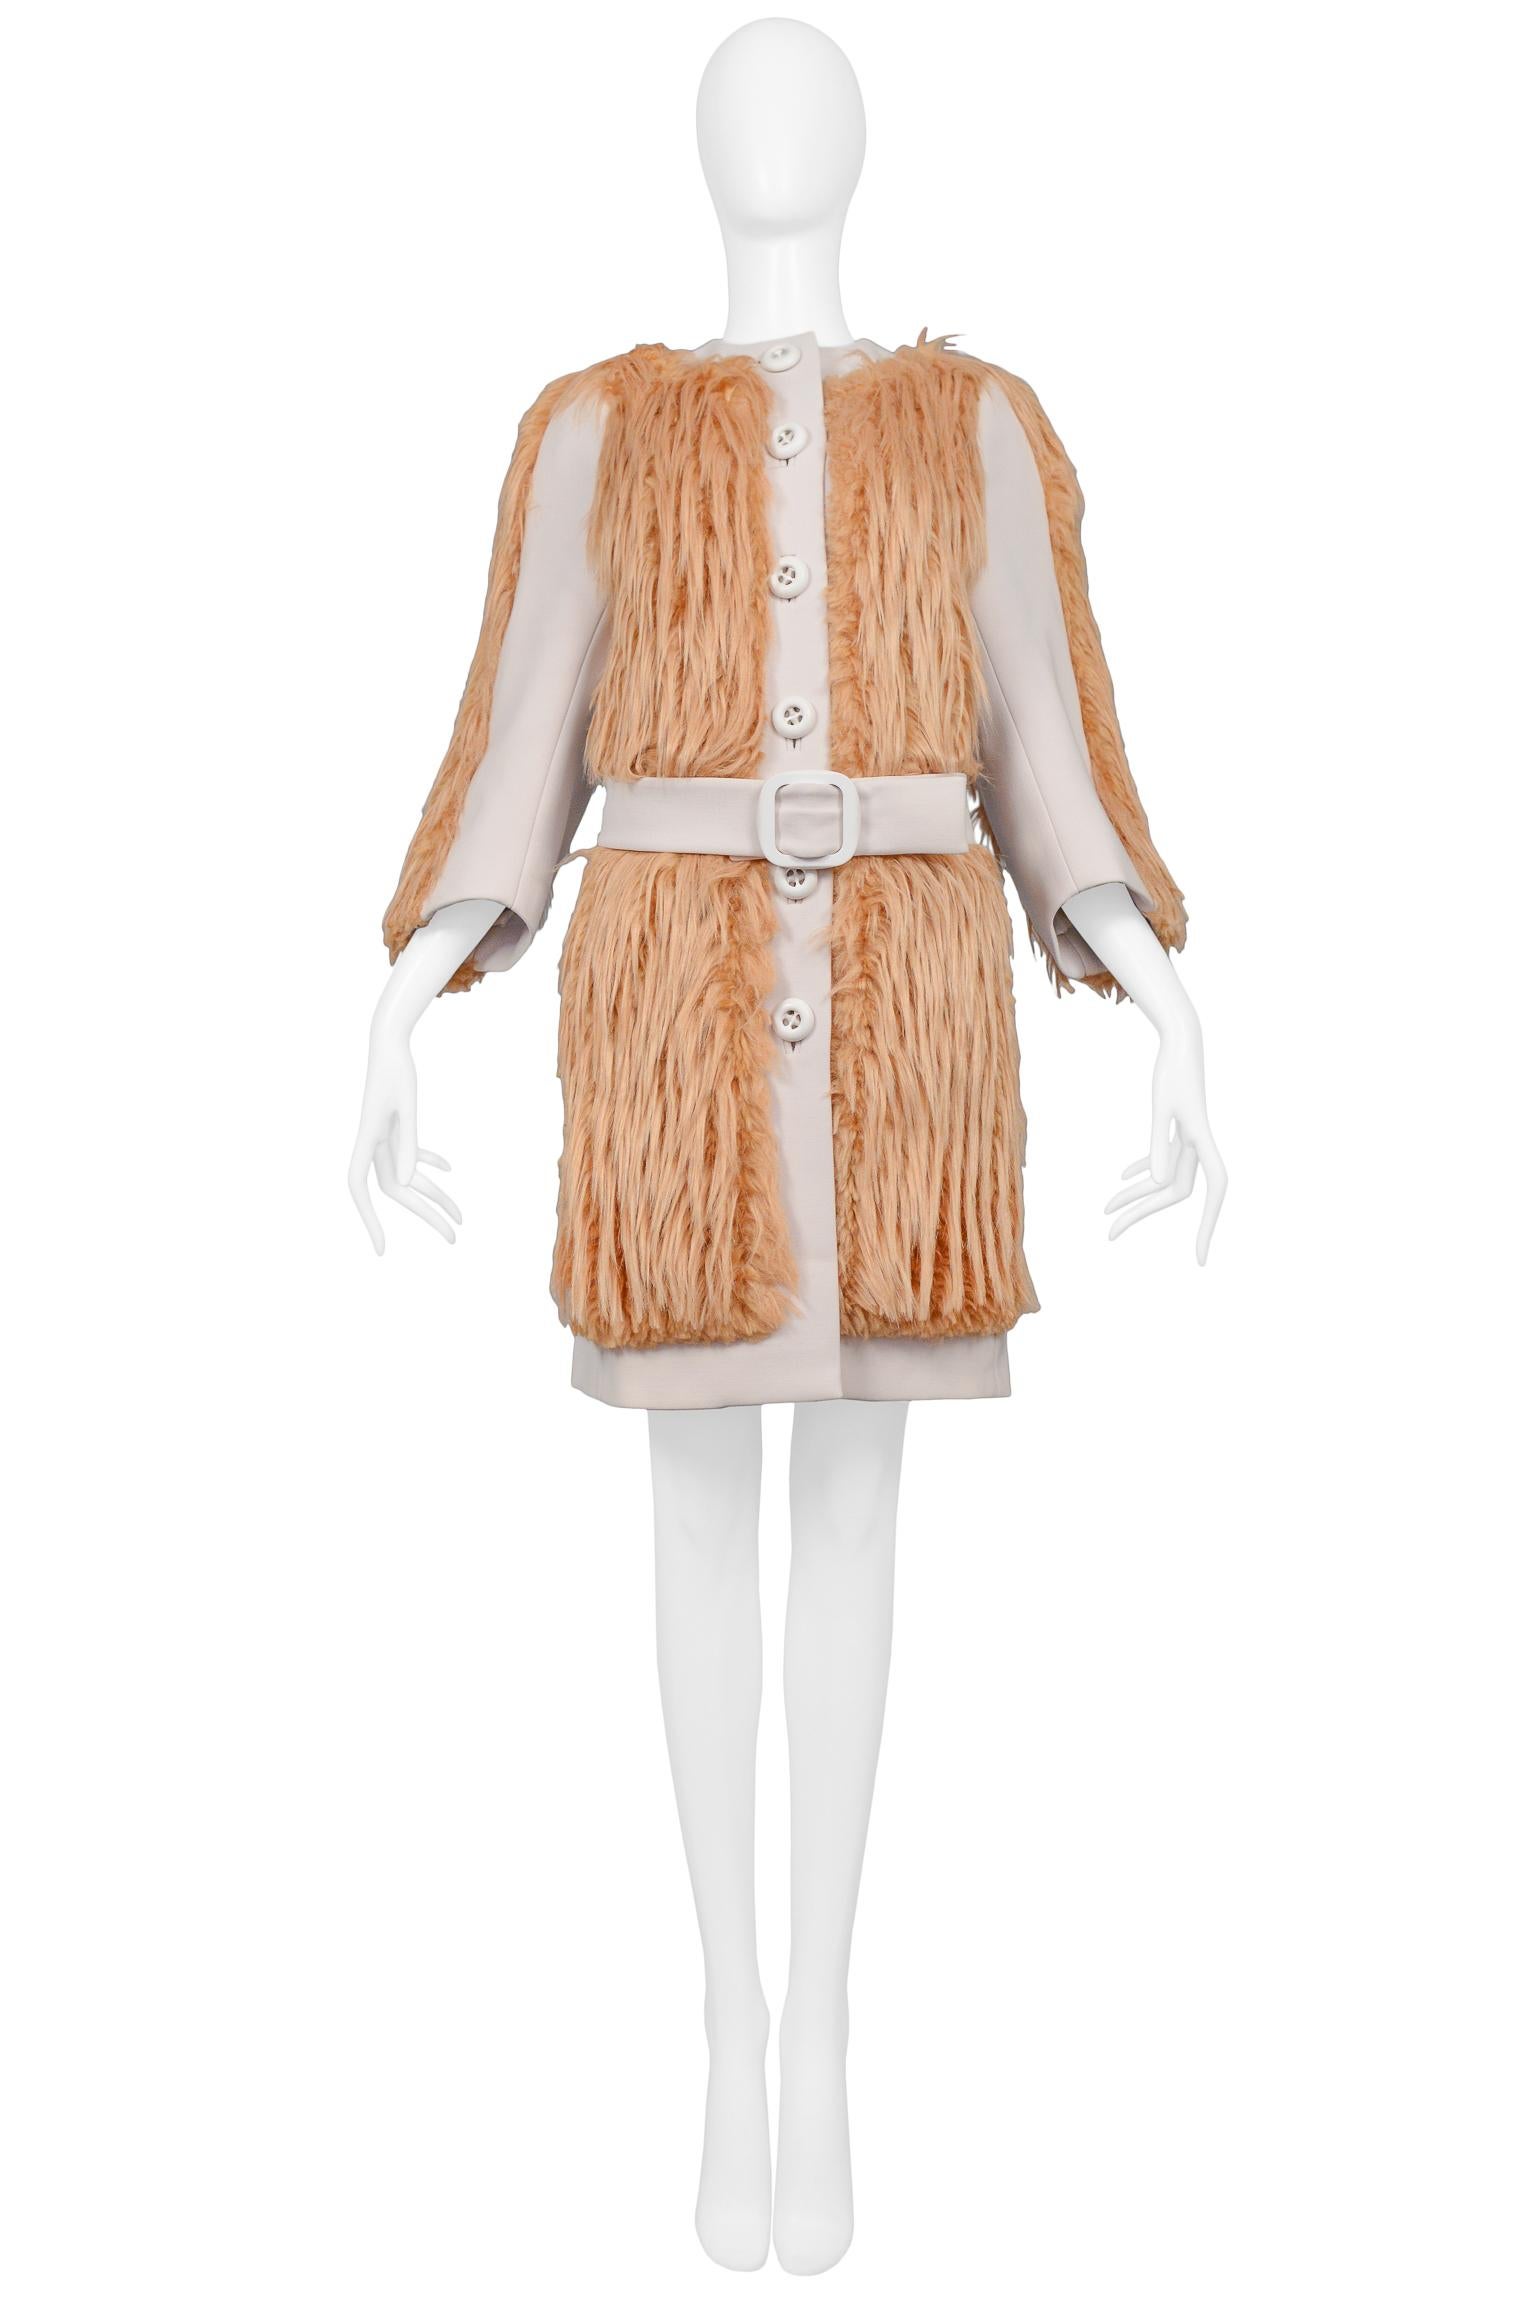 Prada Peach Faux Fur Belted Coat 2011 In Excellent Condition For Sale In Los Angeles, CA